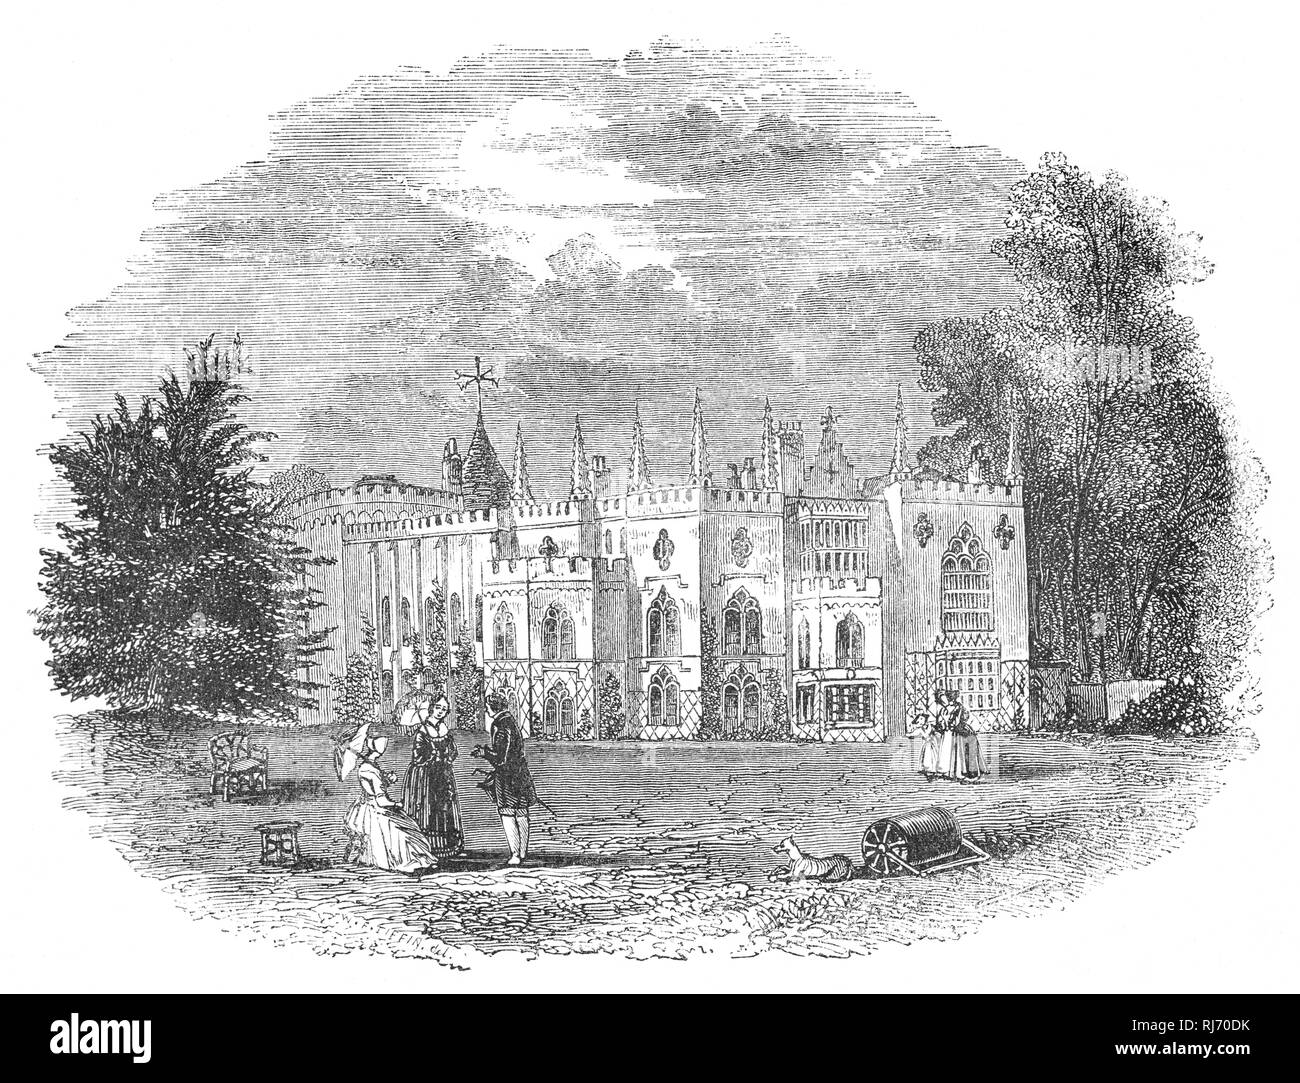 Strawberry Hill House built in Twickenham, south-west London, reviving the Gothic style some decades before  Victorian successors. It was built by Horatio Walpole, 4th Earl of Orford (1717-1797), also known as Horace Walpole, the son of the first British Prime Minister, Sir Robert Walpole, was Whig politician, art historian, man of letters, antiquarian and an English writer whose literary reputation rests on the first Gothic novel, The Castle of Otranto (1764), and his Letters, which are of significant social and political interest. Stock Photo